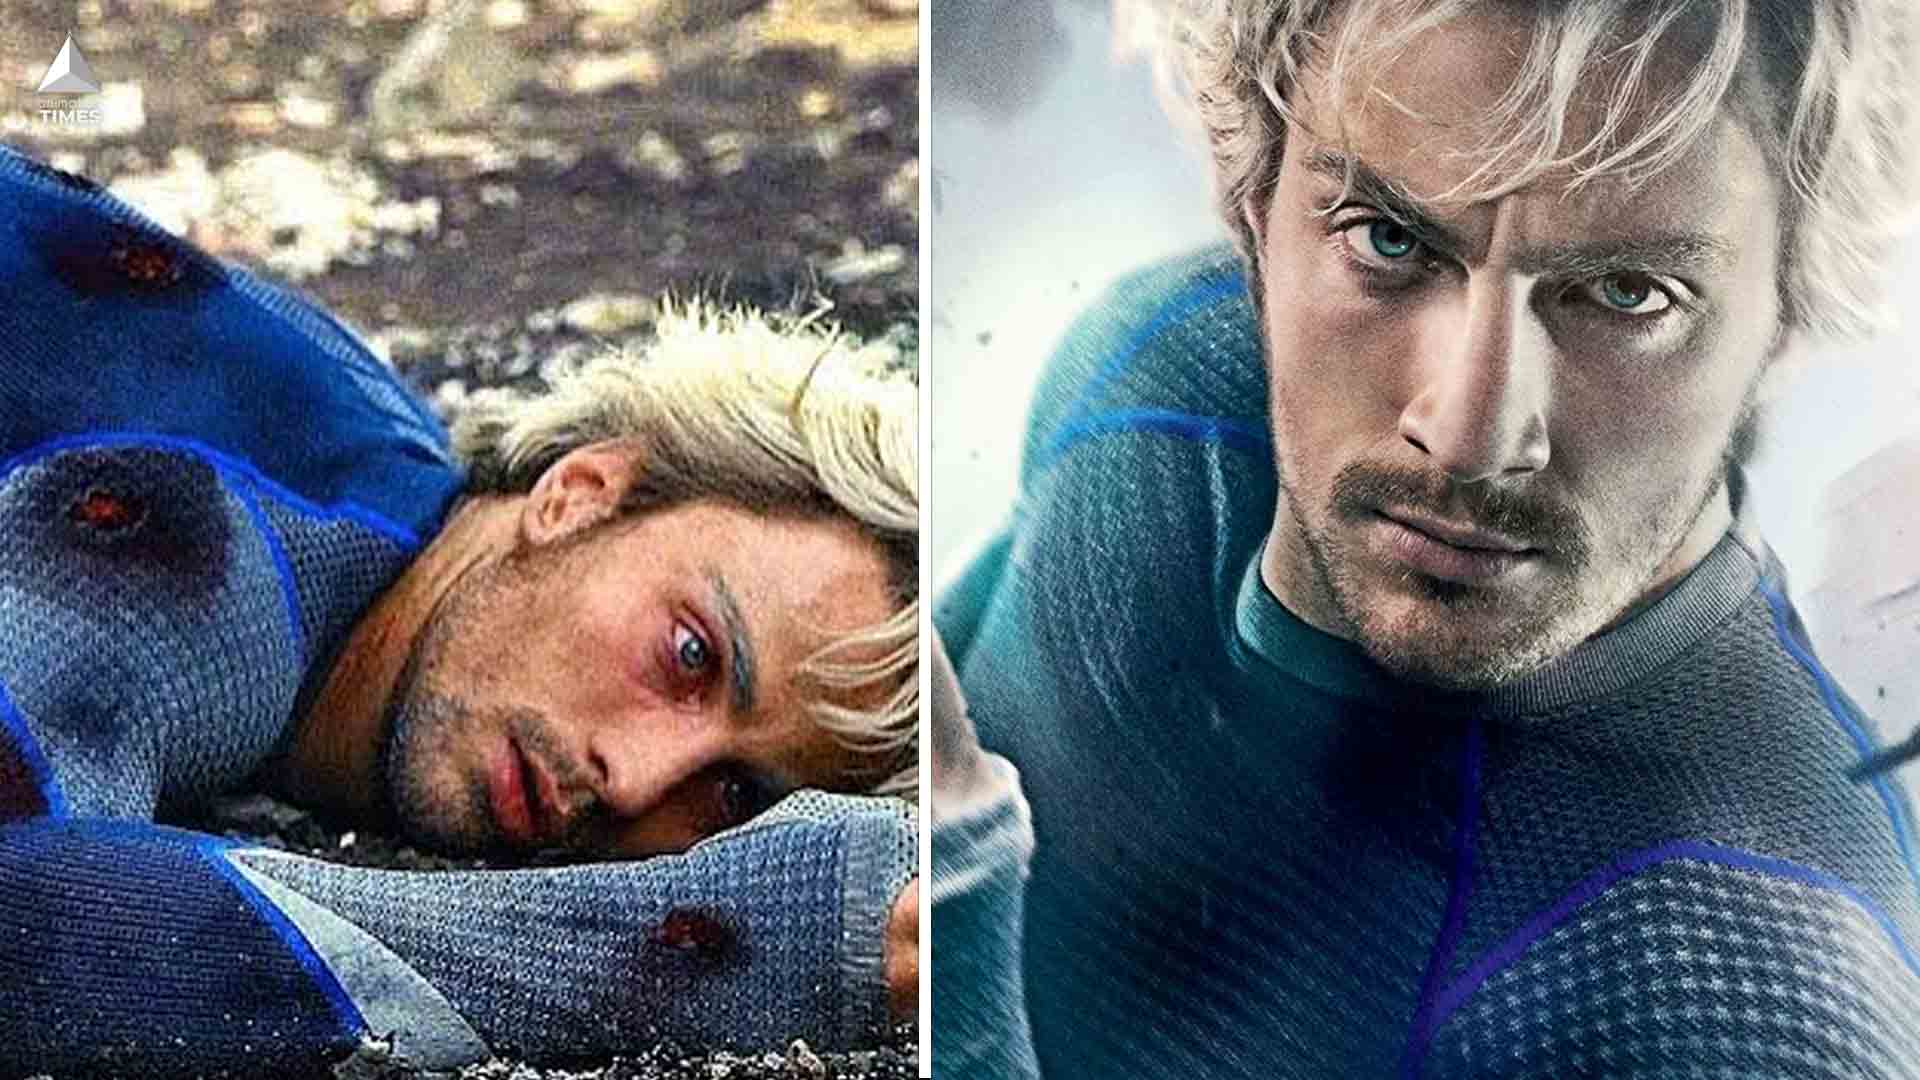 Why Ultron Killing Quicksilver Was Supposed To Happen